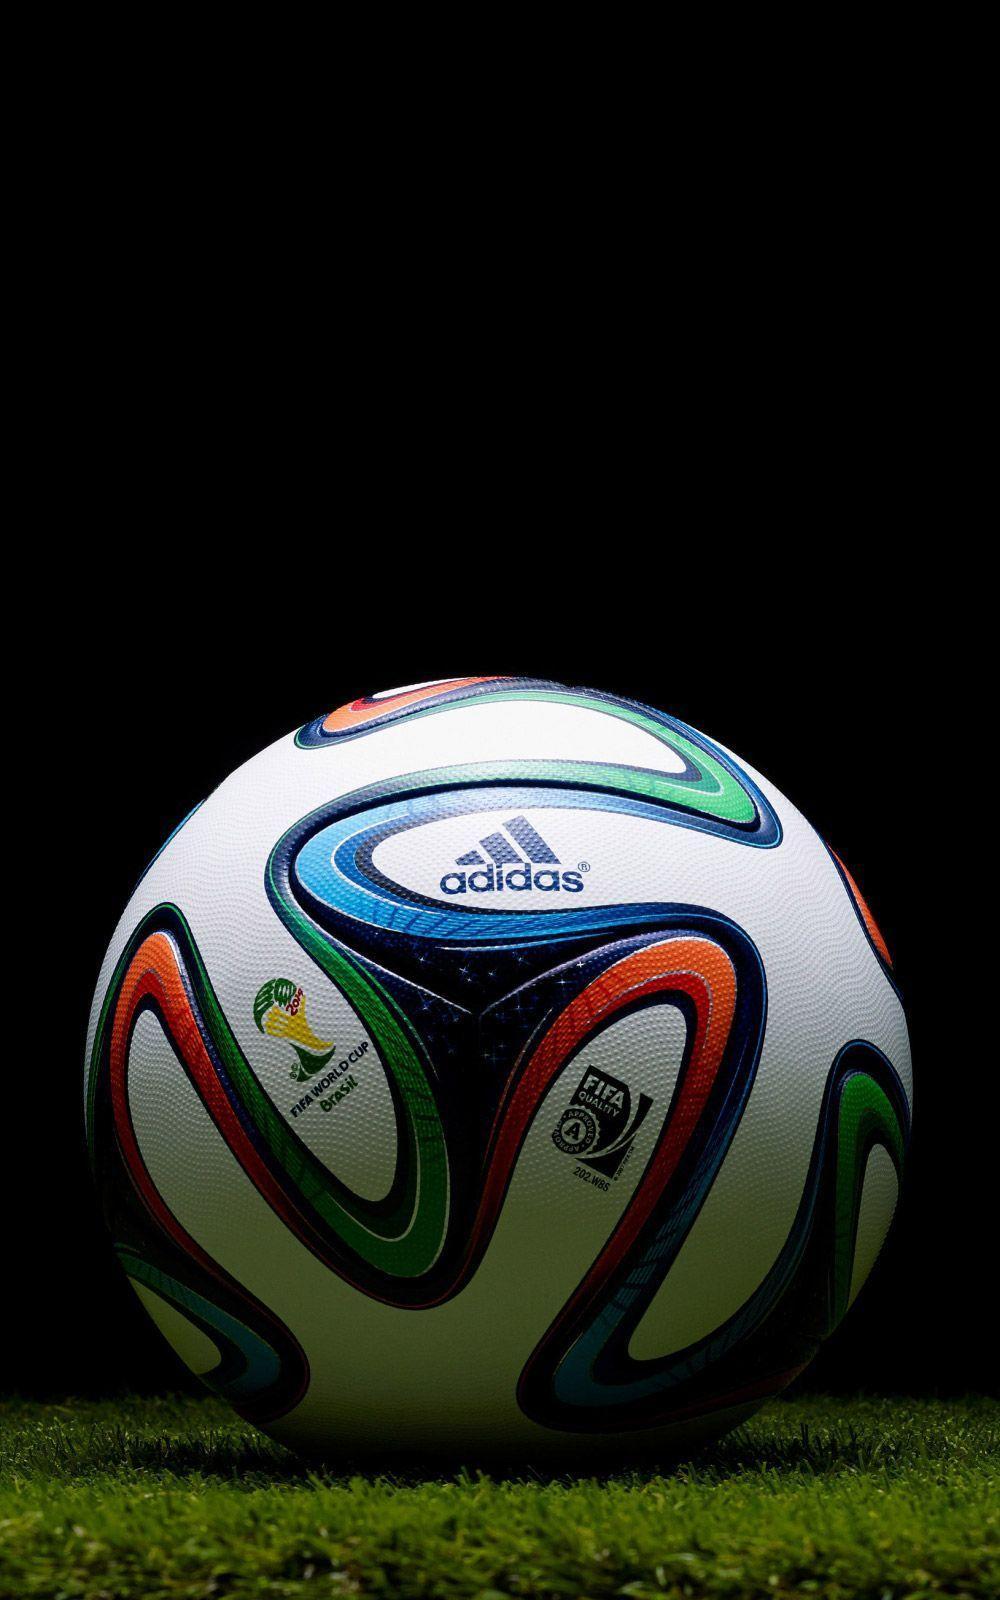 Football World Cup iphone Wallpaper Background